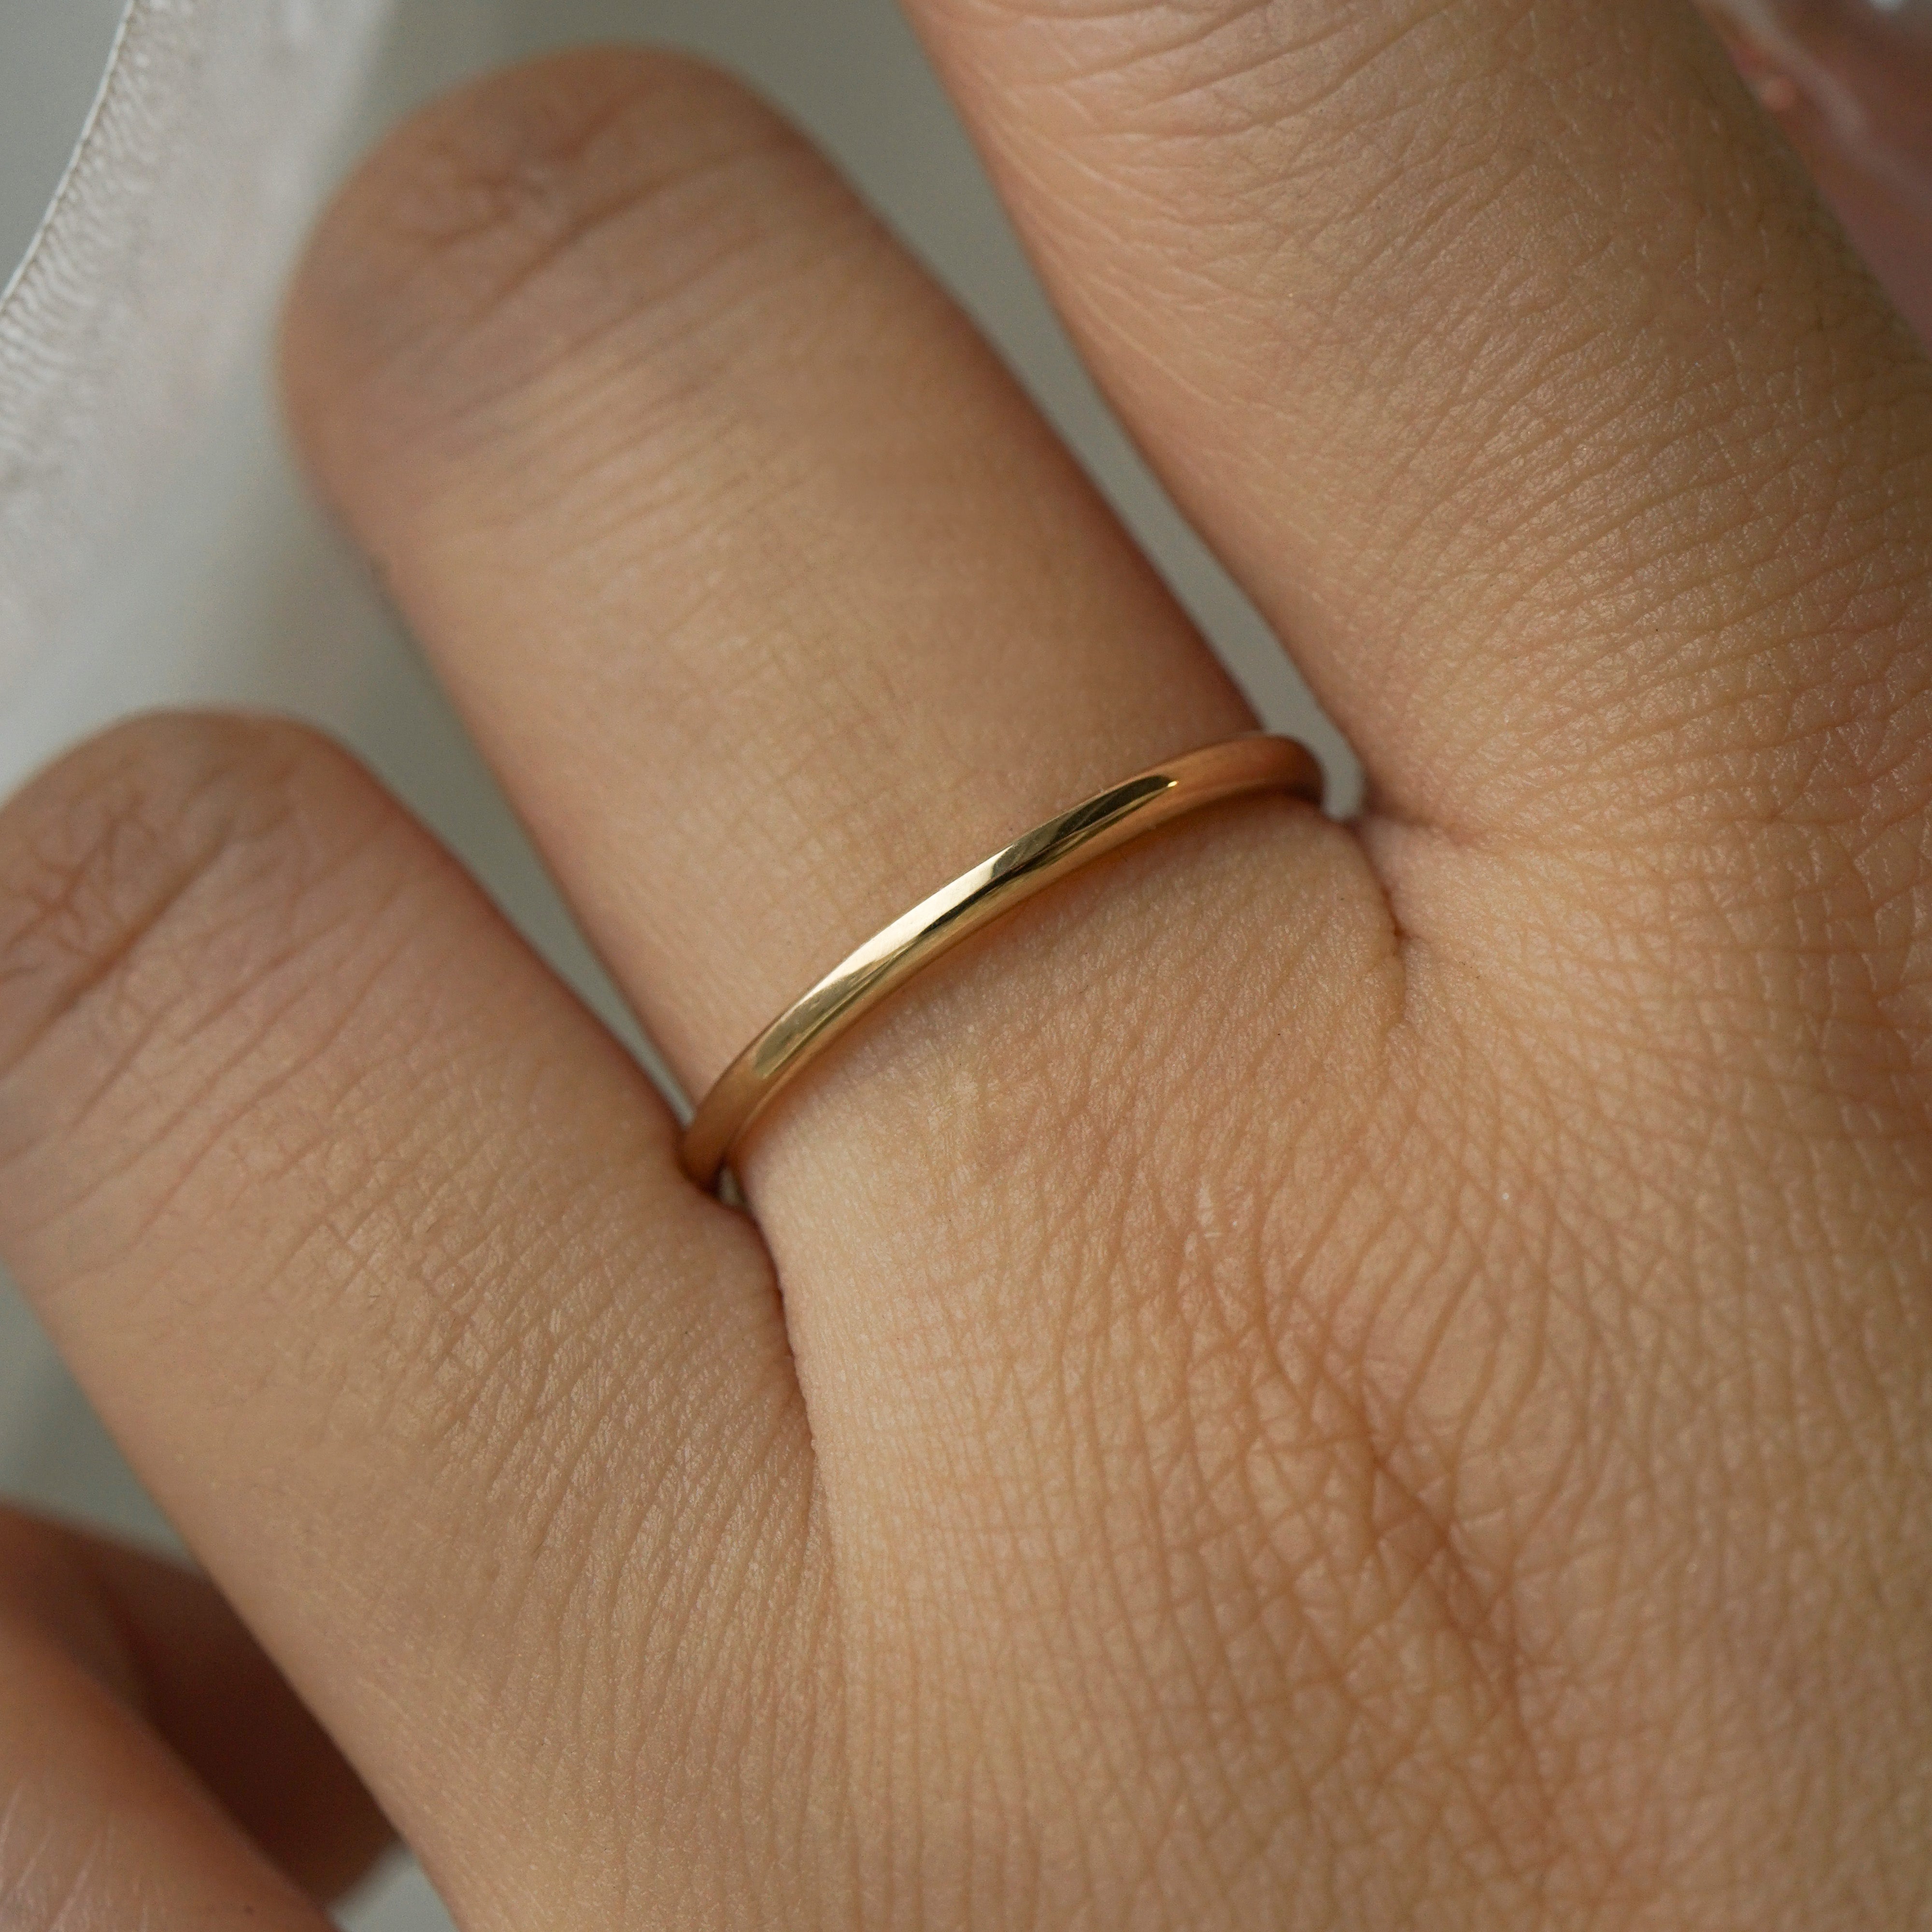 A stock photo of Laurie Fleming Jewellery's plain solid gold "Myrtle" band, a 1.4mm wide stacking ring/wedding band, handmade in Toronto. The ring is worn on a hand with a light grey background.